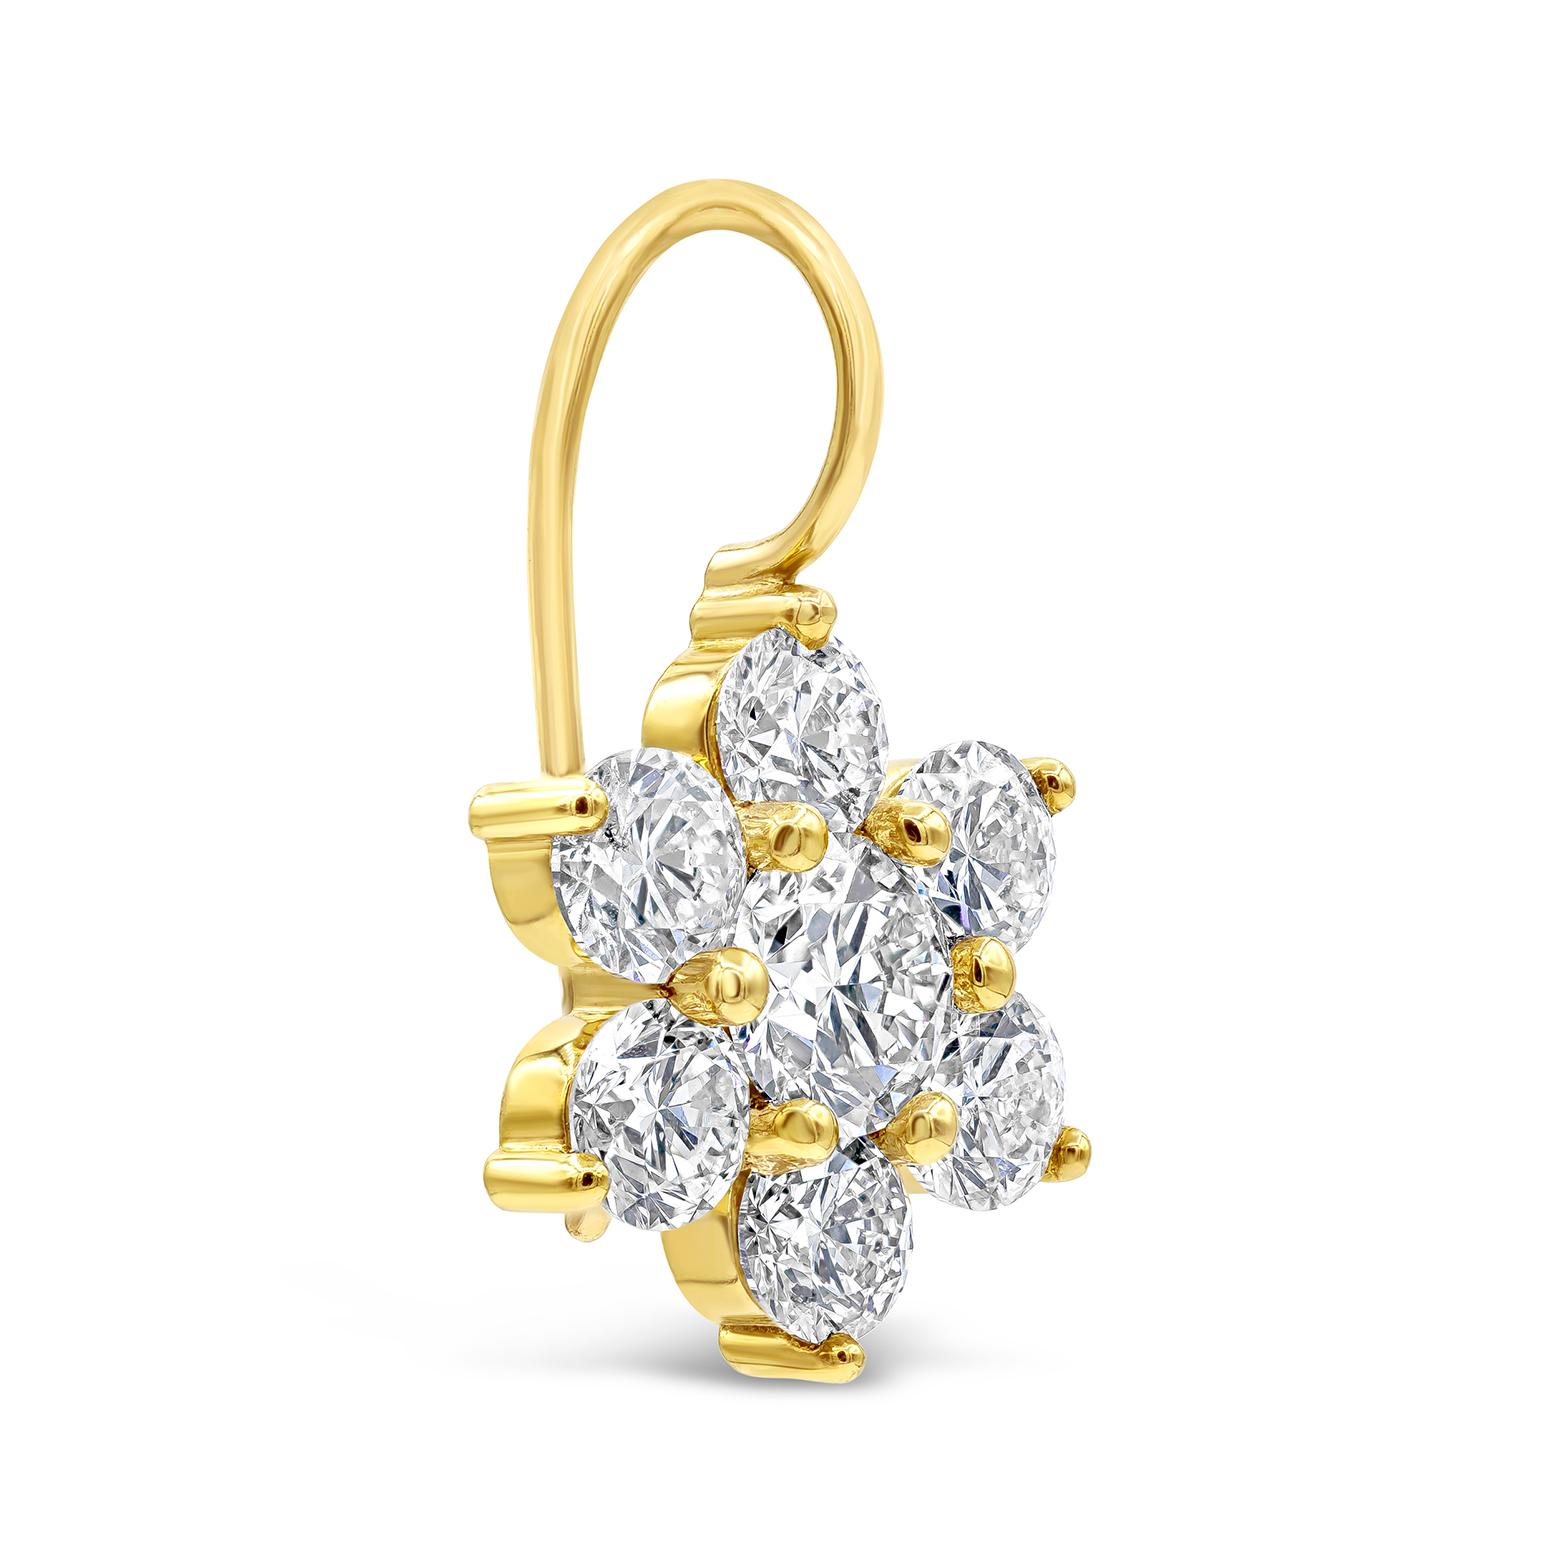 A brilliant and stylish pair of earrings showcasing round brilliant diamonds, set in a floral motif design. Diamonds are approximately H color and SI1 clarity and weigh 6.58 carats total. Made in 18K yellow gold. 

Style available in different price